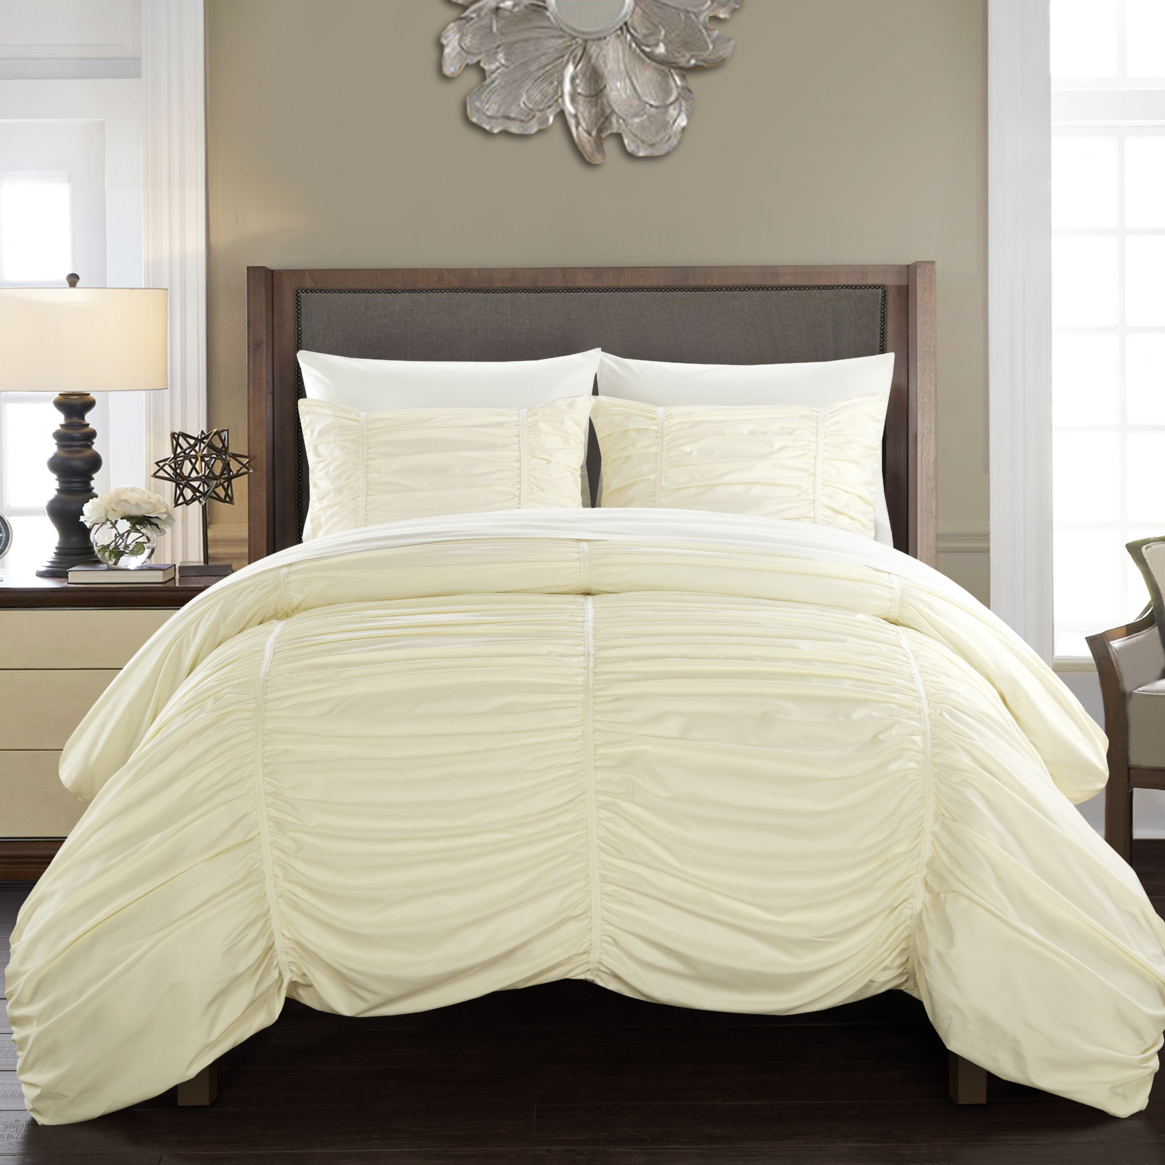 Kleia 7 Or 5 Piece Comforter Set Contemporary Striped Ruched Ruffled Design Bed In A Bag - Beige, King